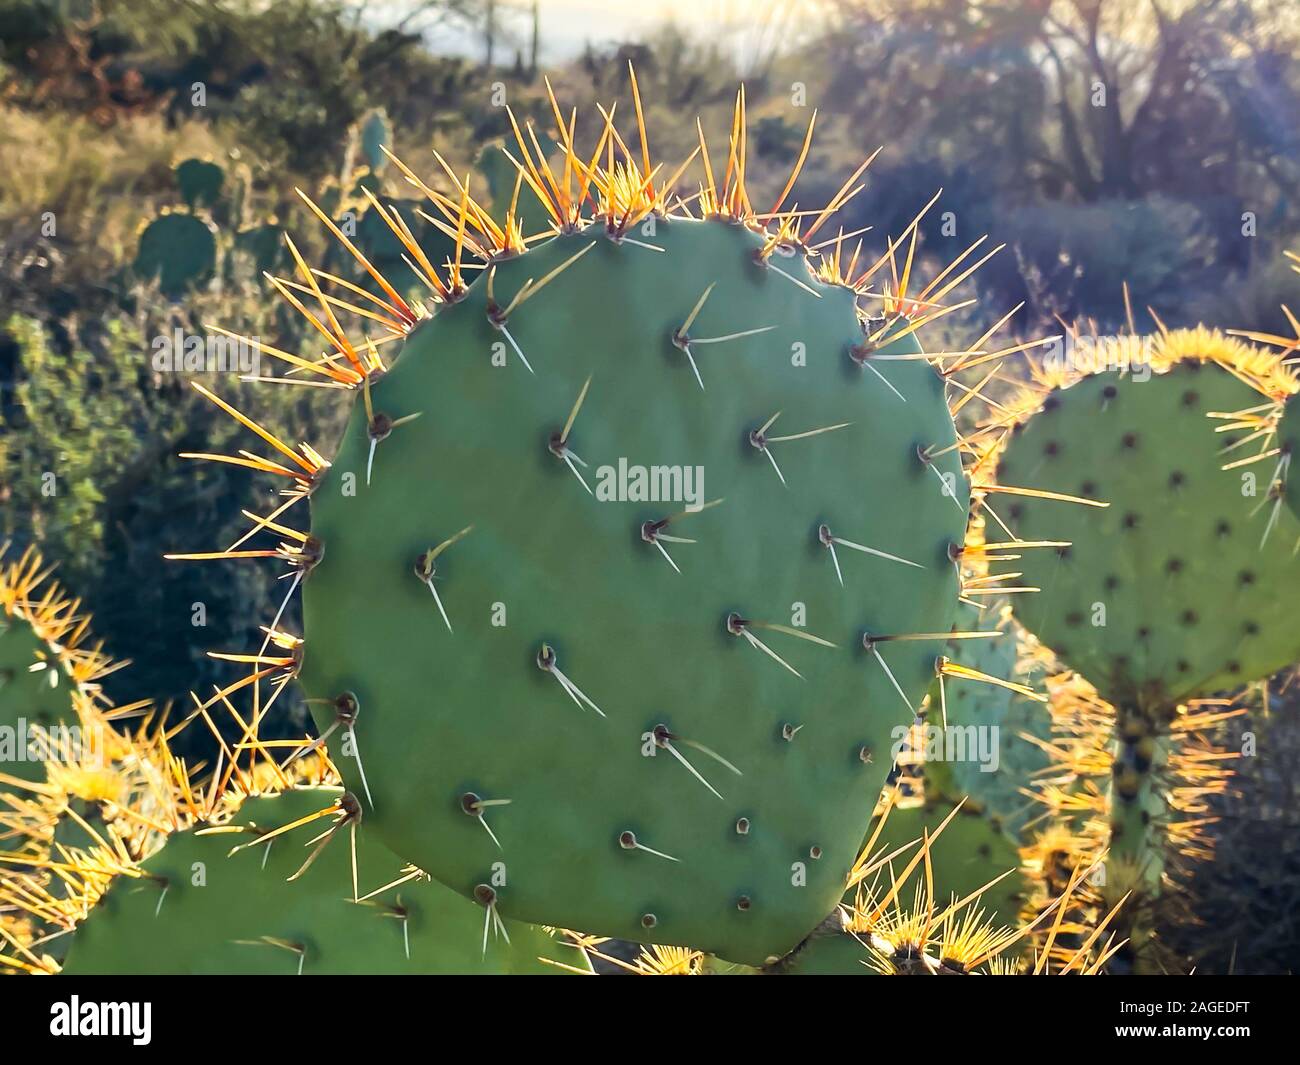 Prickly Pear or Paddle Cactus Stock Photo